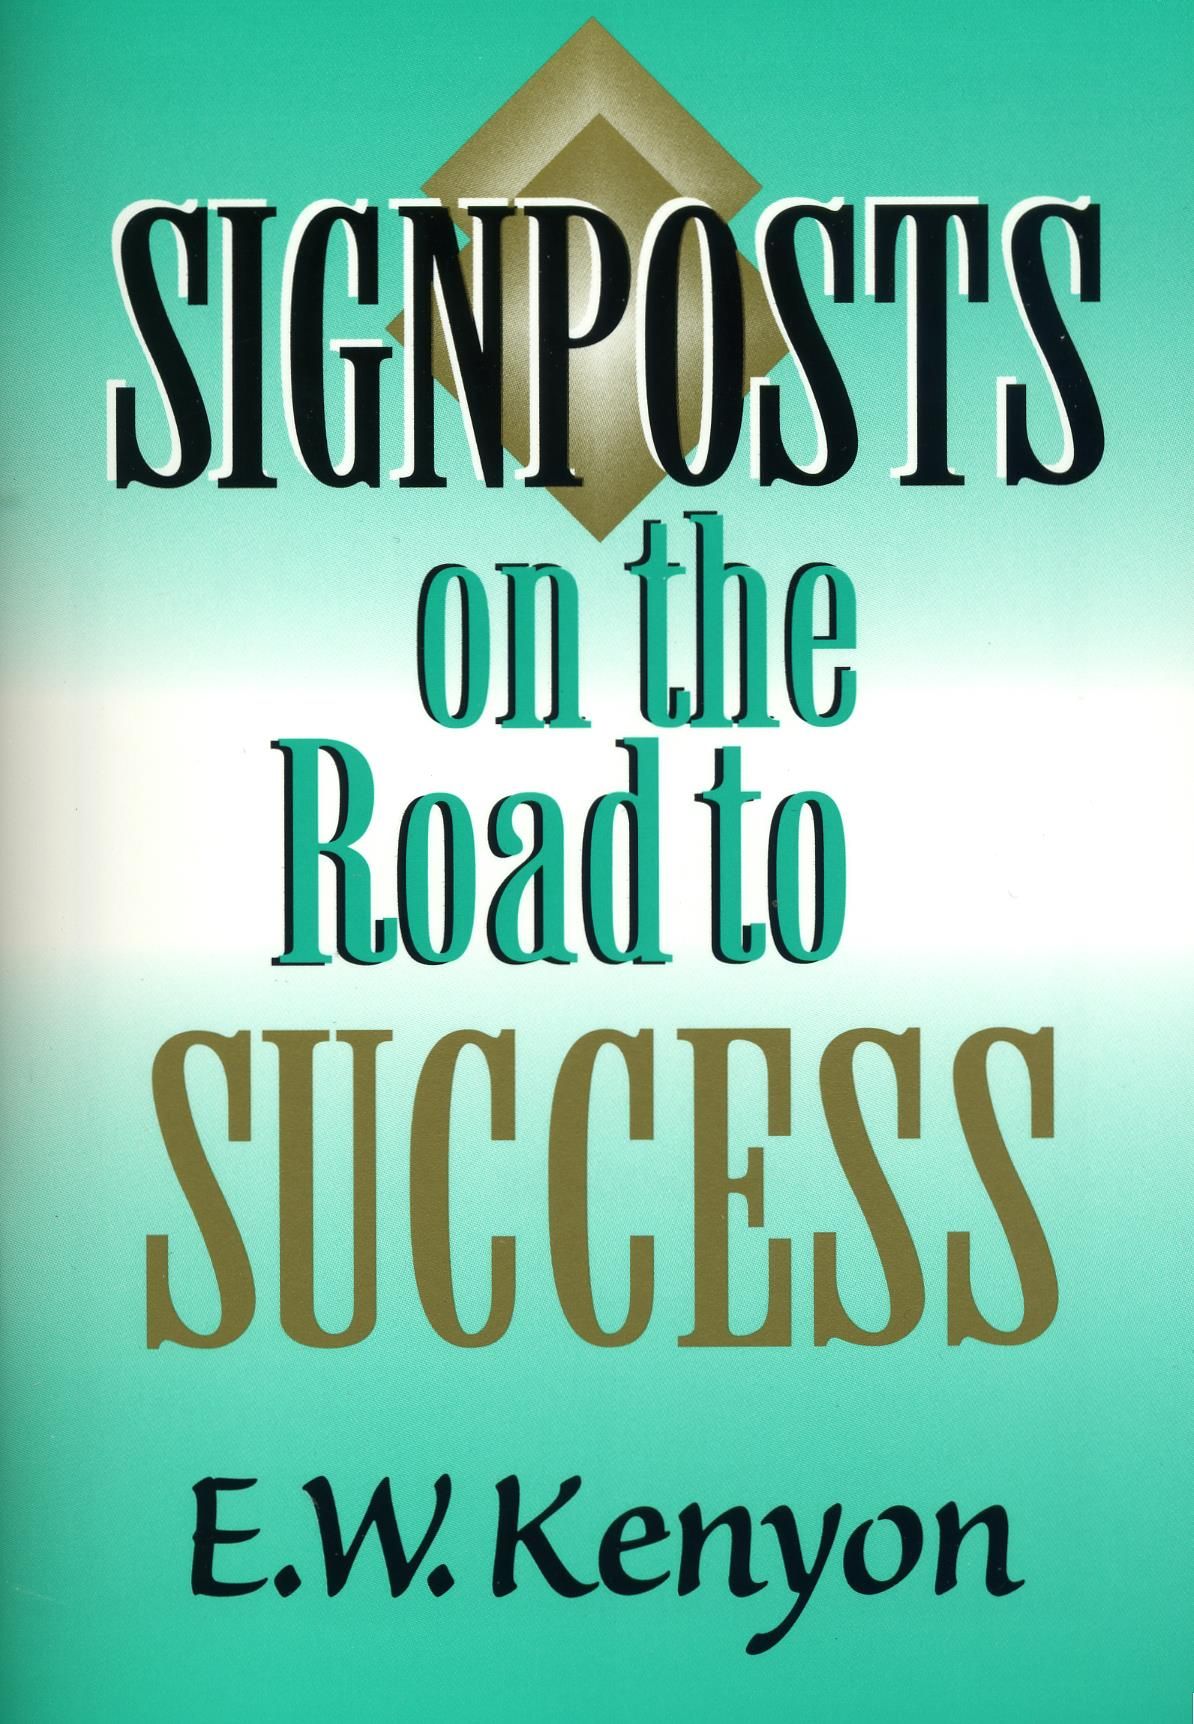 Englische Bücher - E.W. Kenyon: Signposts on the Road to Success